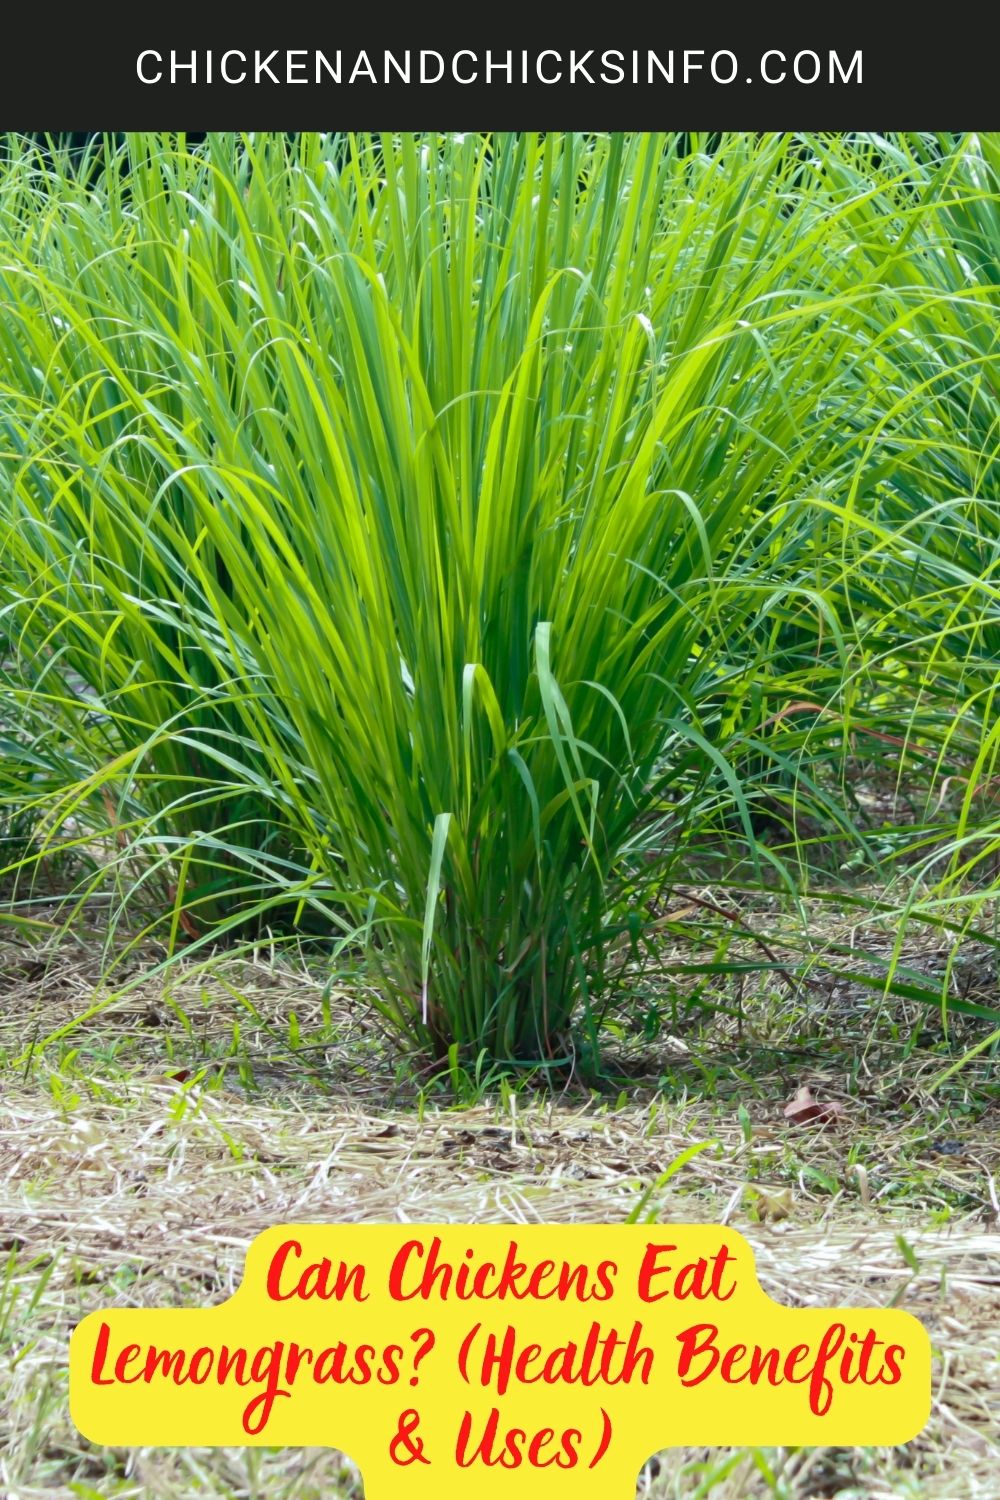 Can Chickens Eat Lemongrass? (Health Benefits & Uses) poster.
